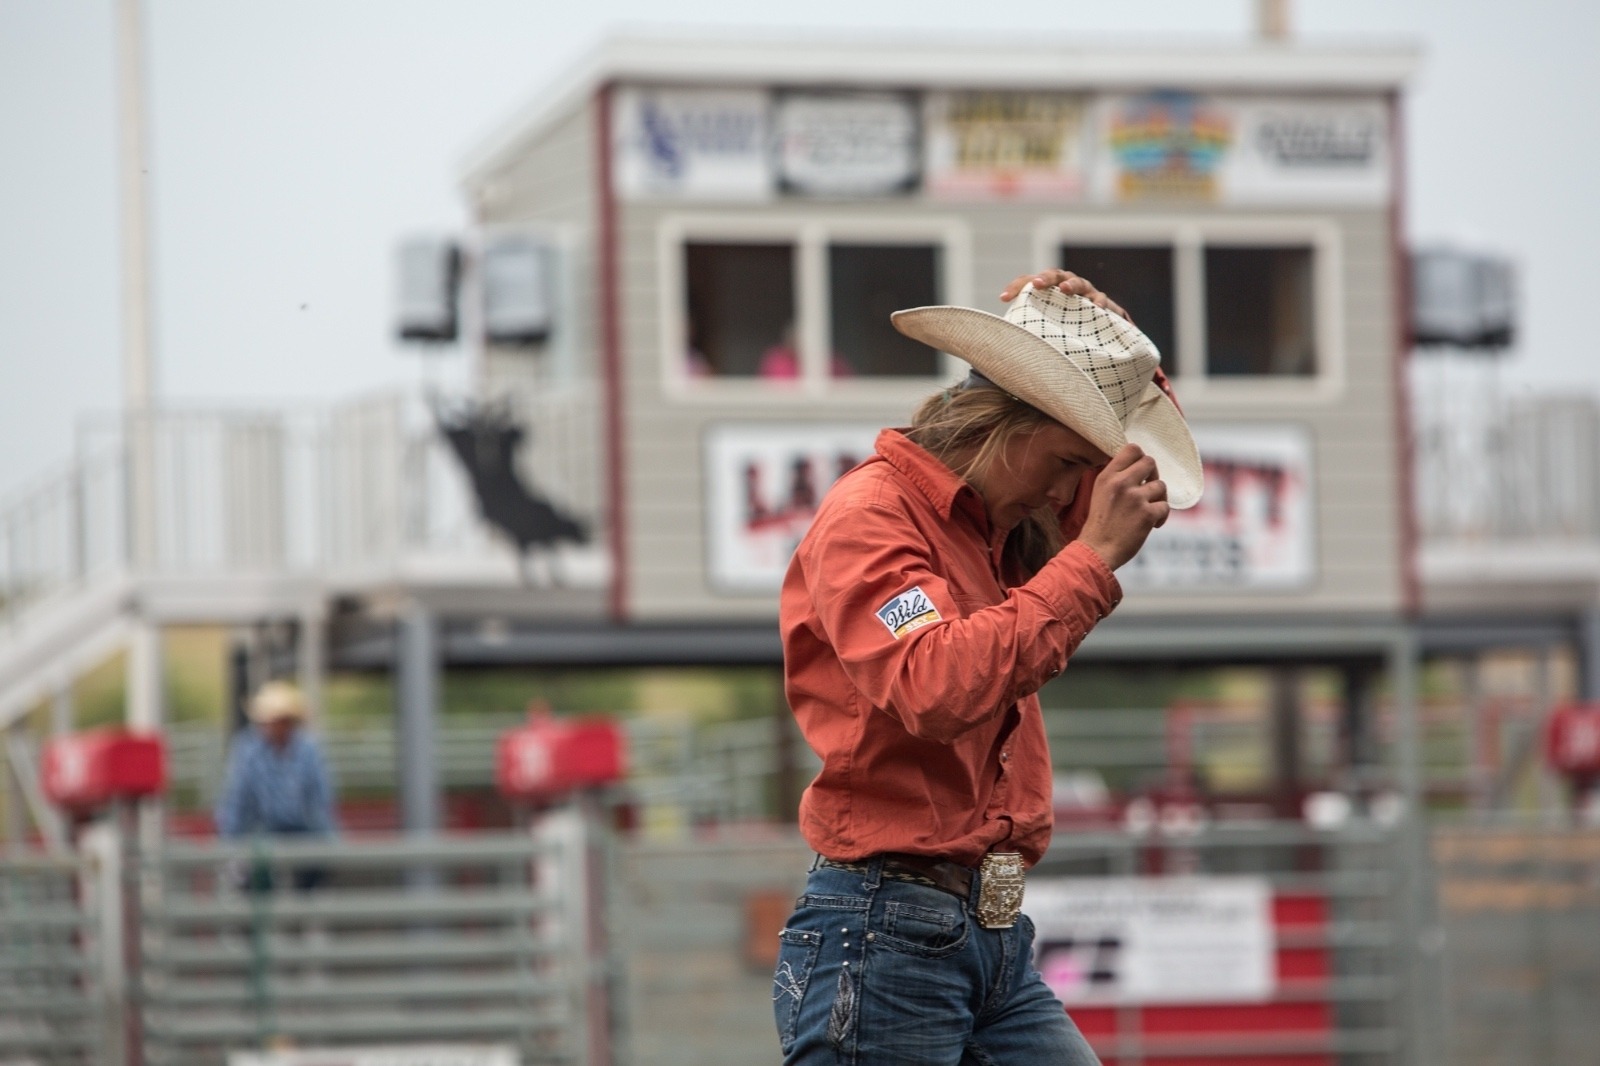 Top: Irene Johnson competes in the goat tying event at the Lewistown Rodeo in August 2018. Since she was 15 years old, Irene has been rodeoing on the Montana High School Rodeo Association. Middle: Johnson competes in the goat tying event at the Lewistown Rodeo in August 2018 then (just above) tucks her hat back on with a sense of accomplishment with horsemanship that is equal parts art and technical skill.  All photos by Louise Johns. 